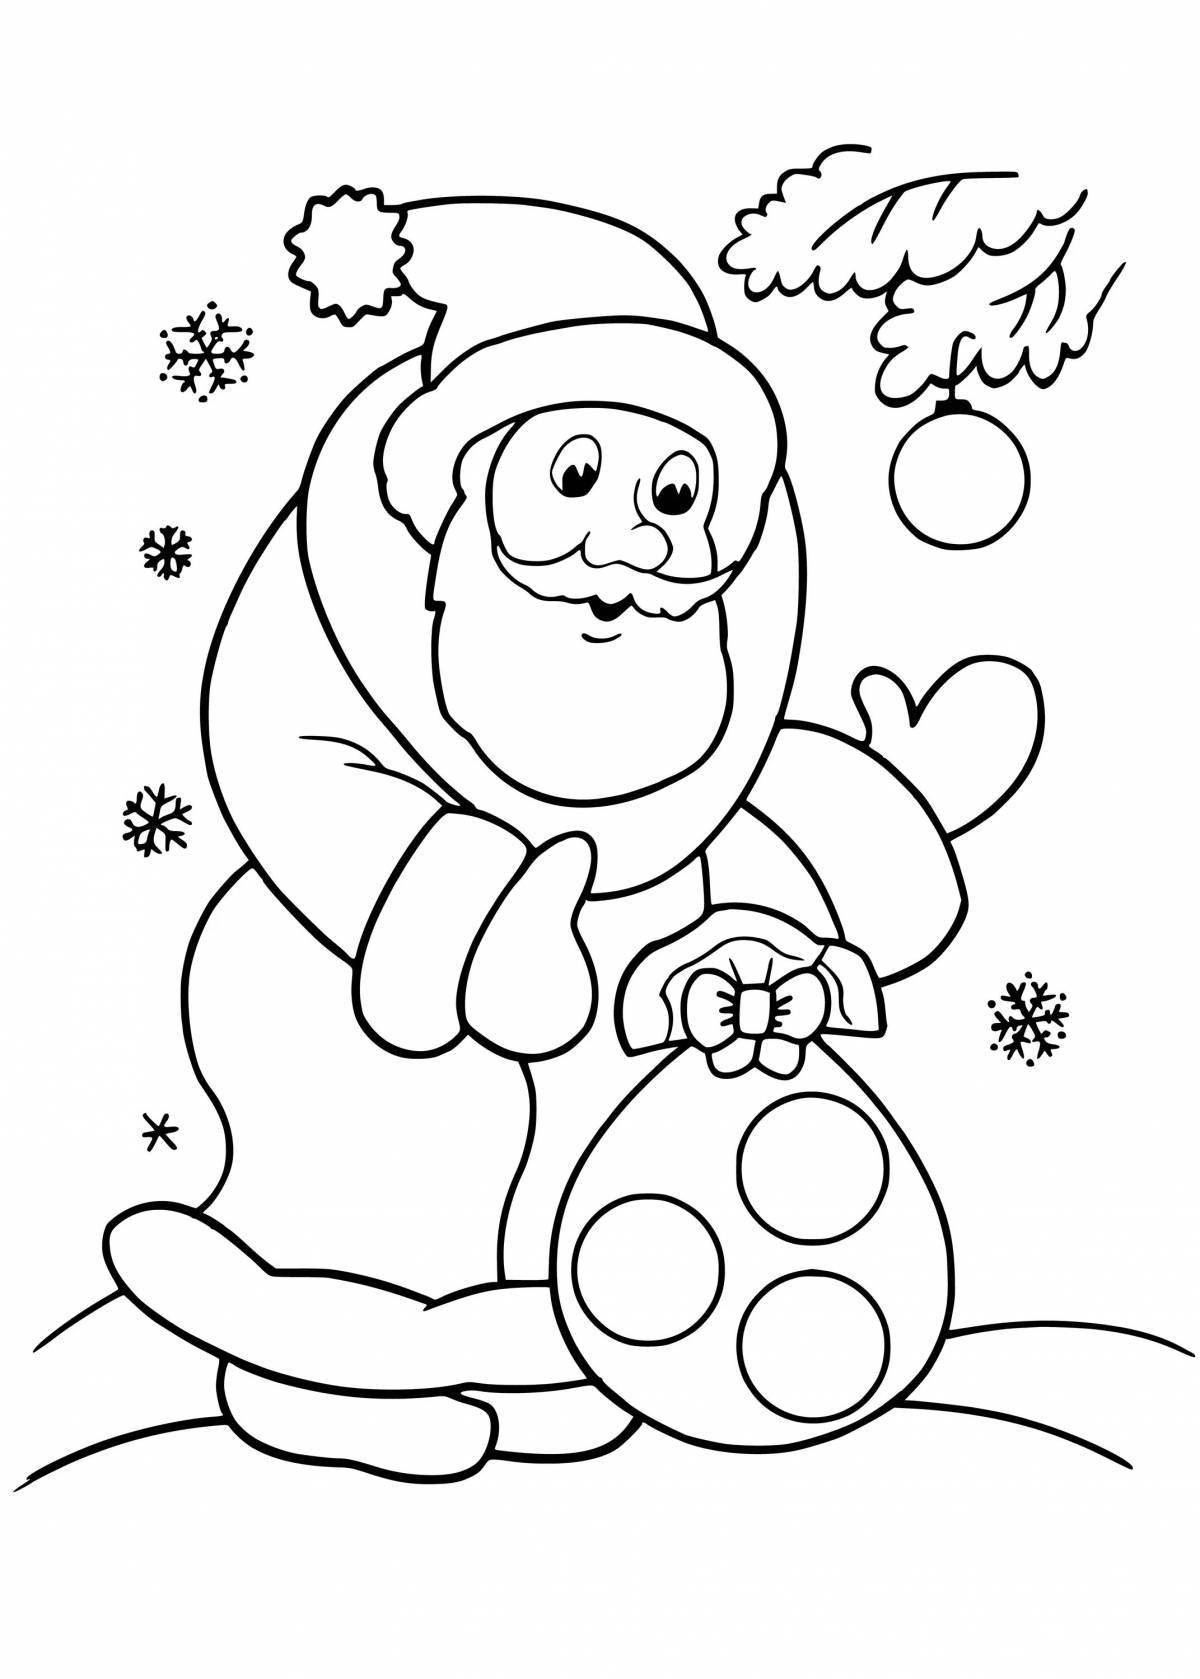 Adorable Christmas coloring book for 5 year olds